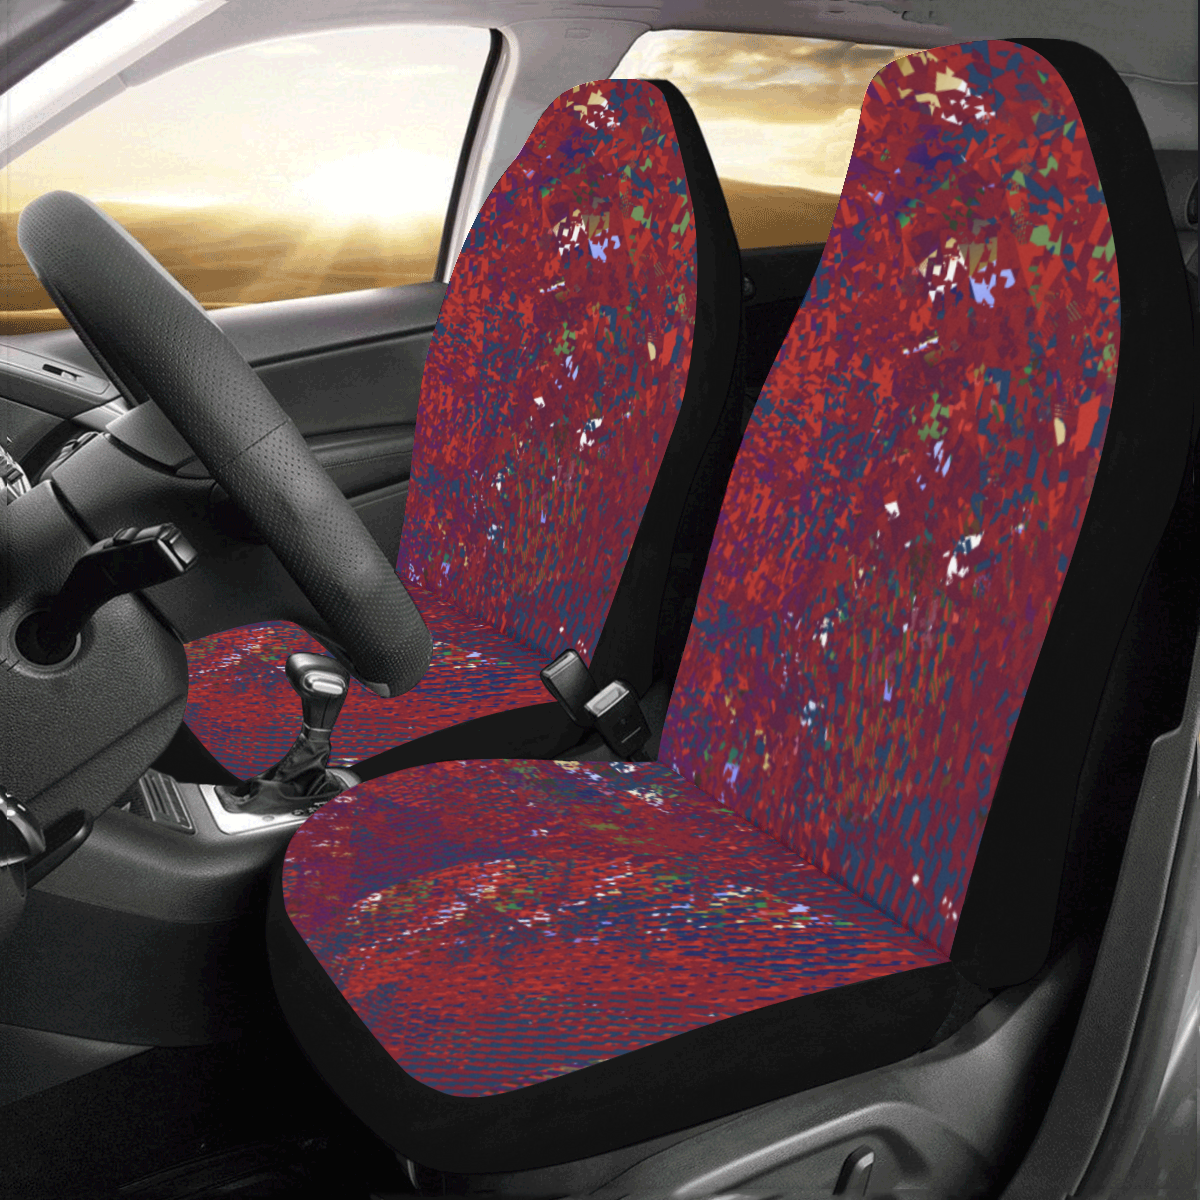 Confusion Car Seat Covers (Set of 2)